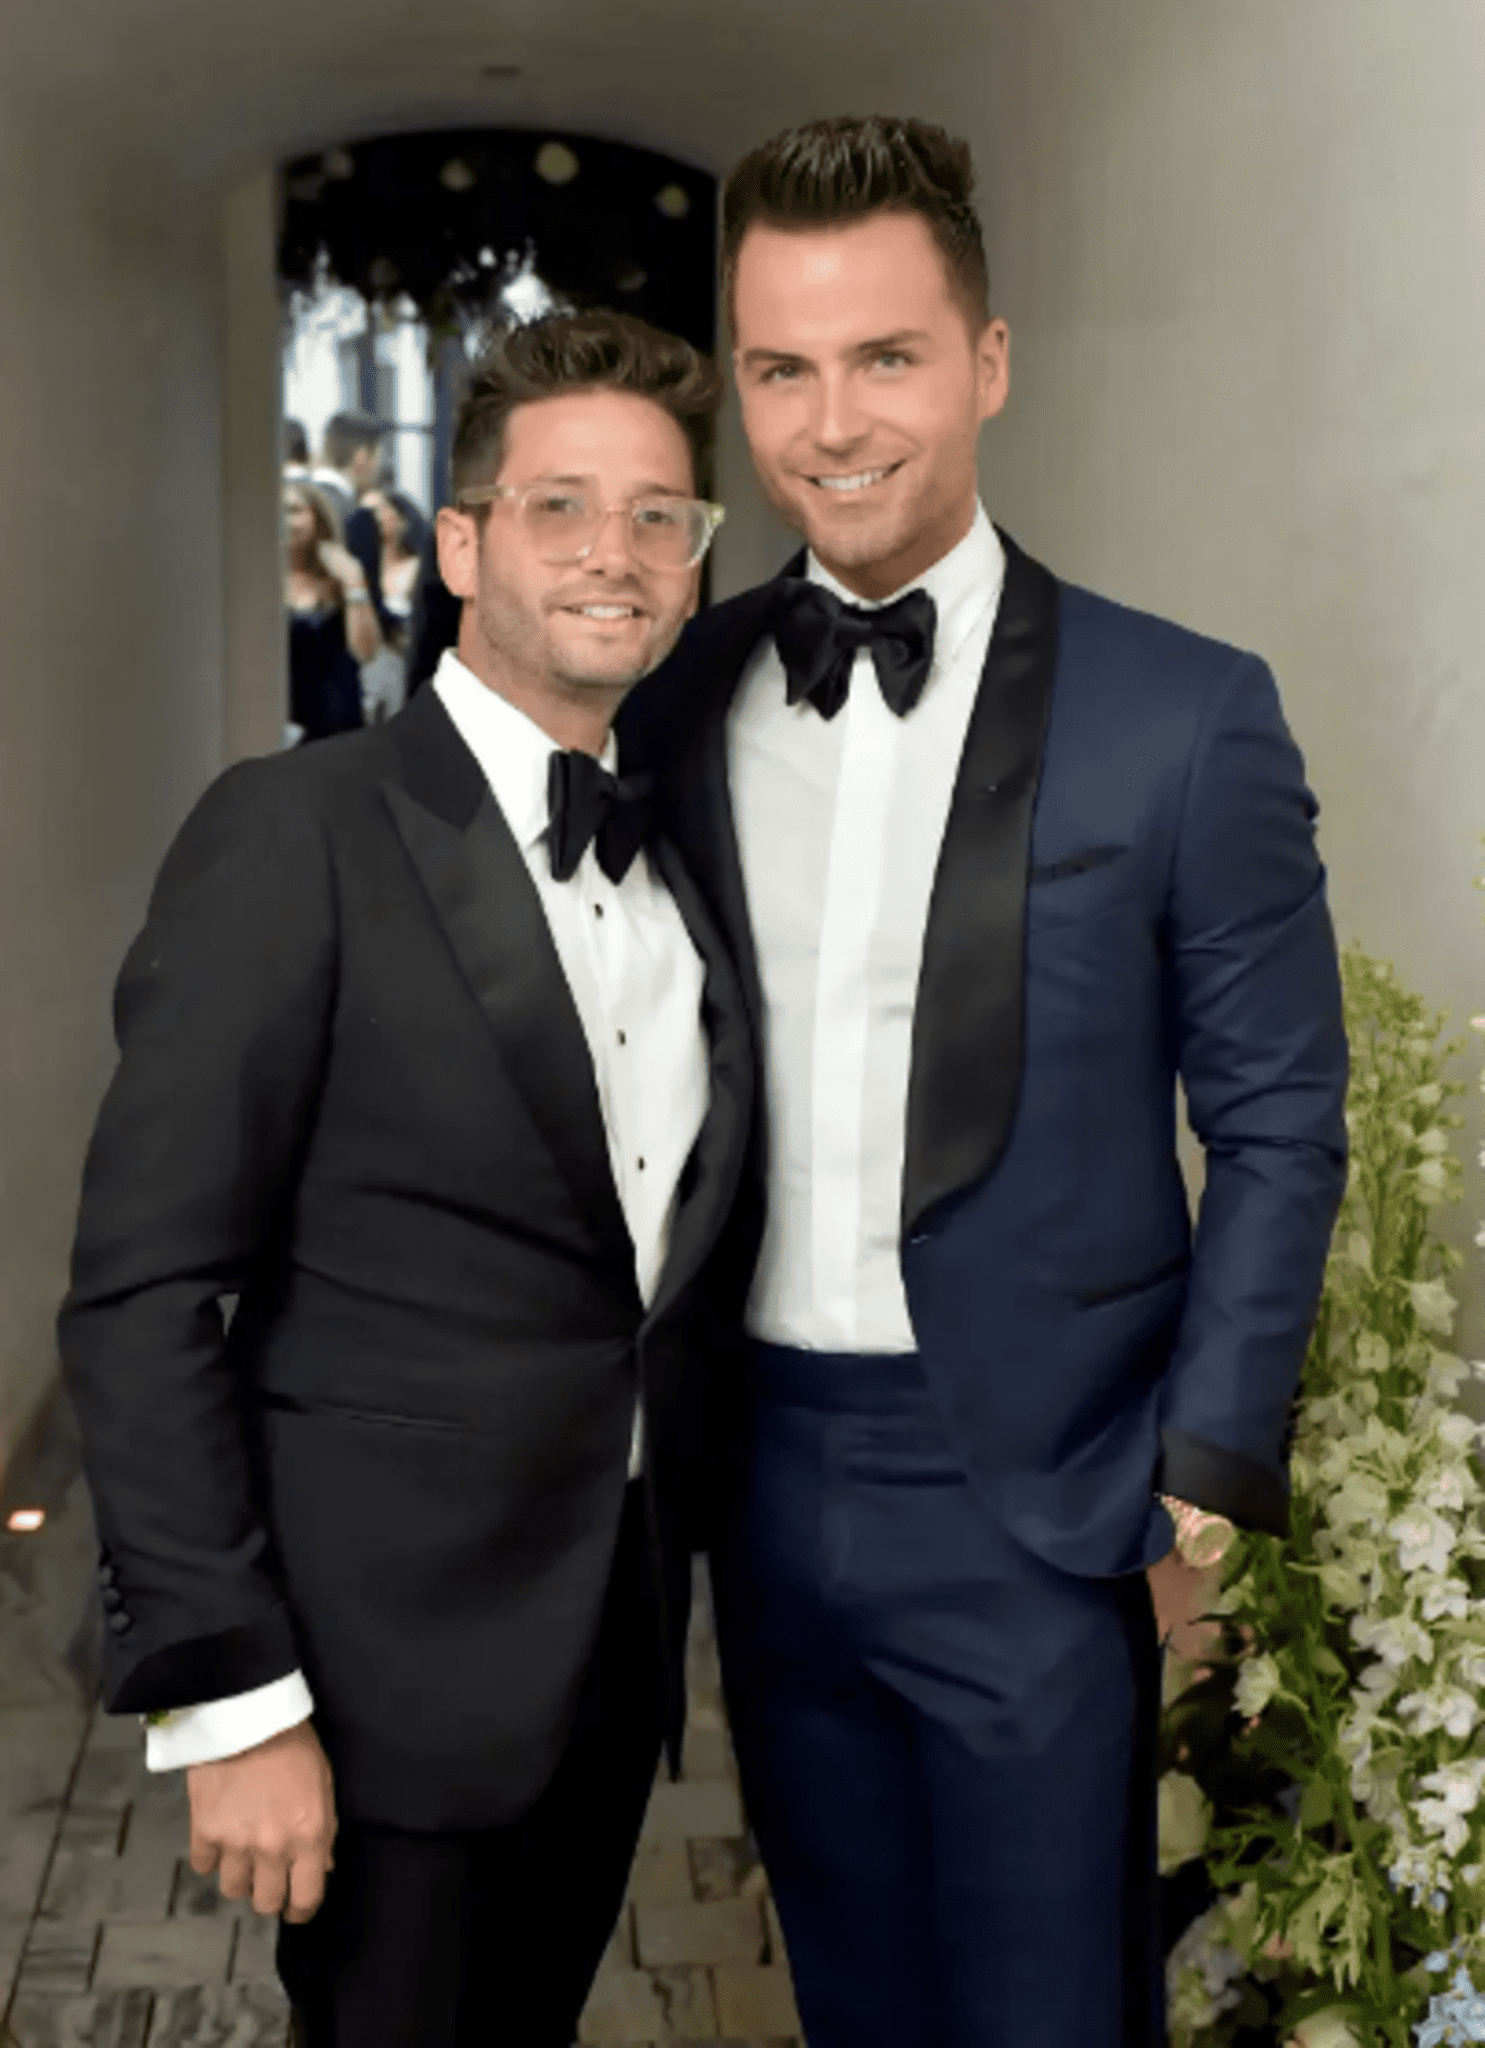 Josh Flagg, Who Is In A Relationship With Andrew Beyer, Is Considering Getting Married Again